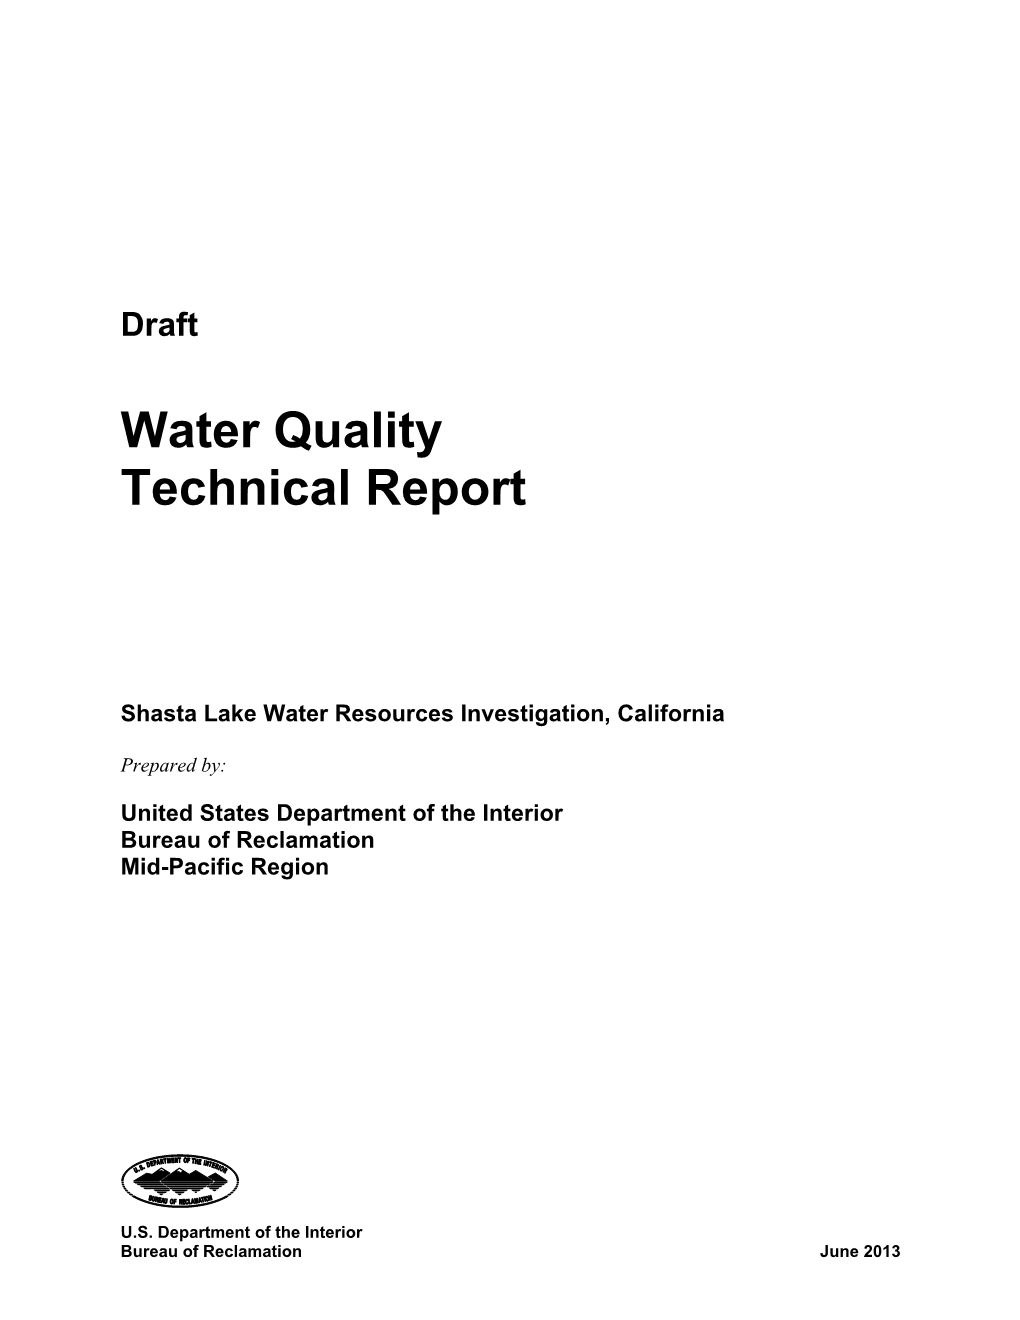 Water Quality Technical Report